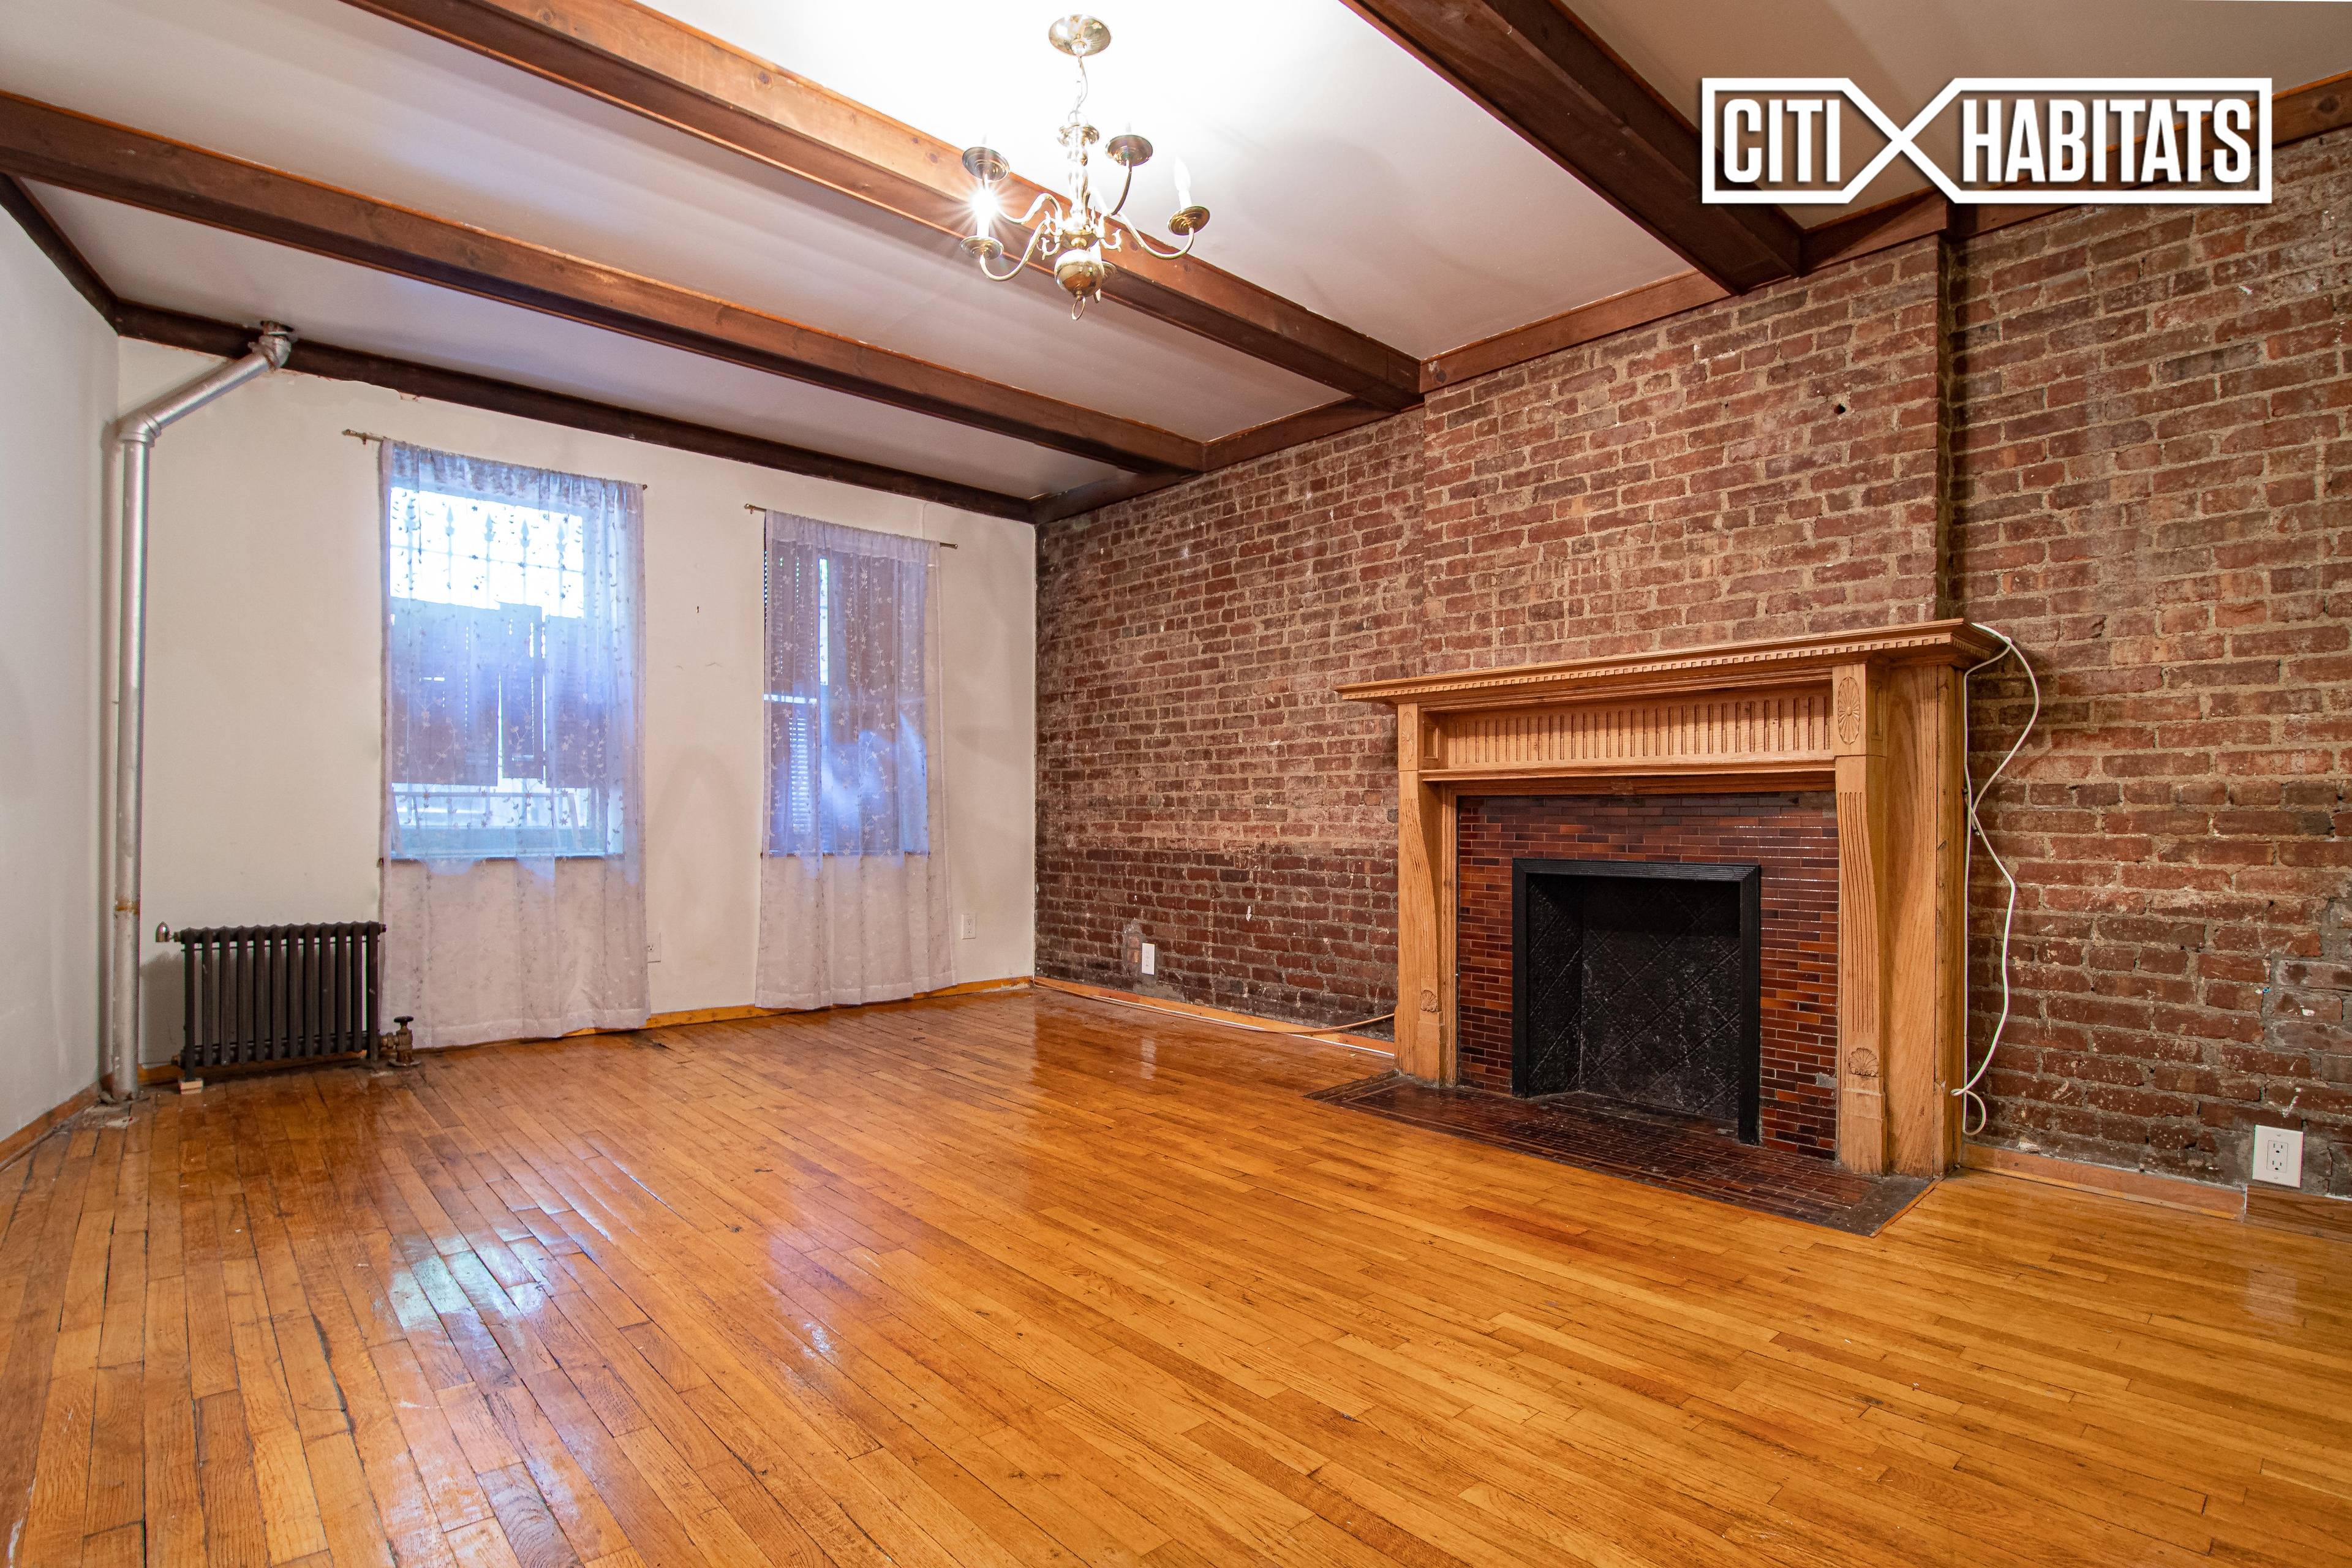 This large studio has walls of exposed brick, a decorative fireplace, a beamed ceiling, stainless steel appliances, and good closet space.